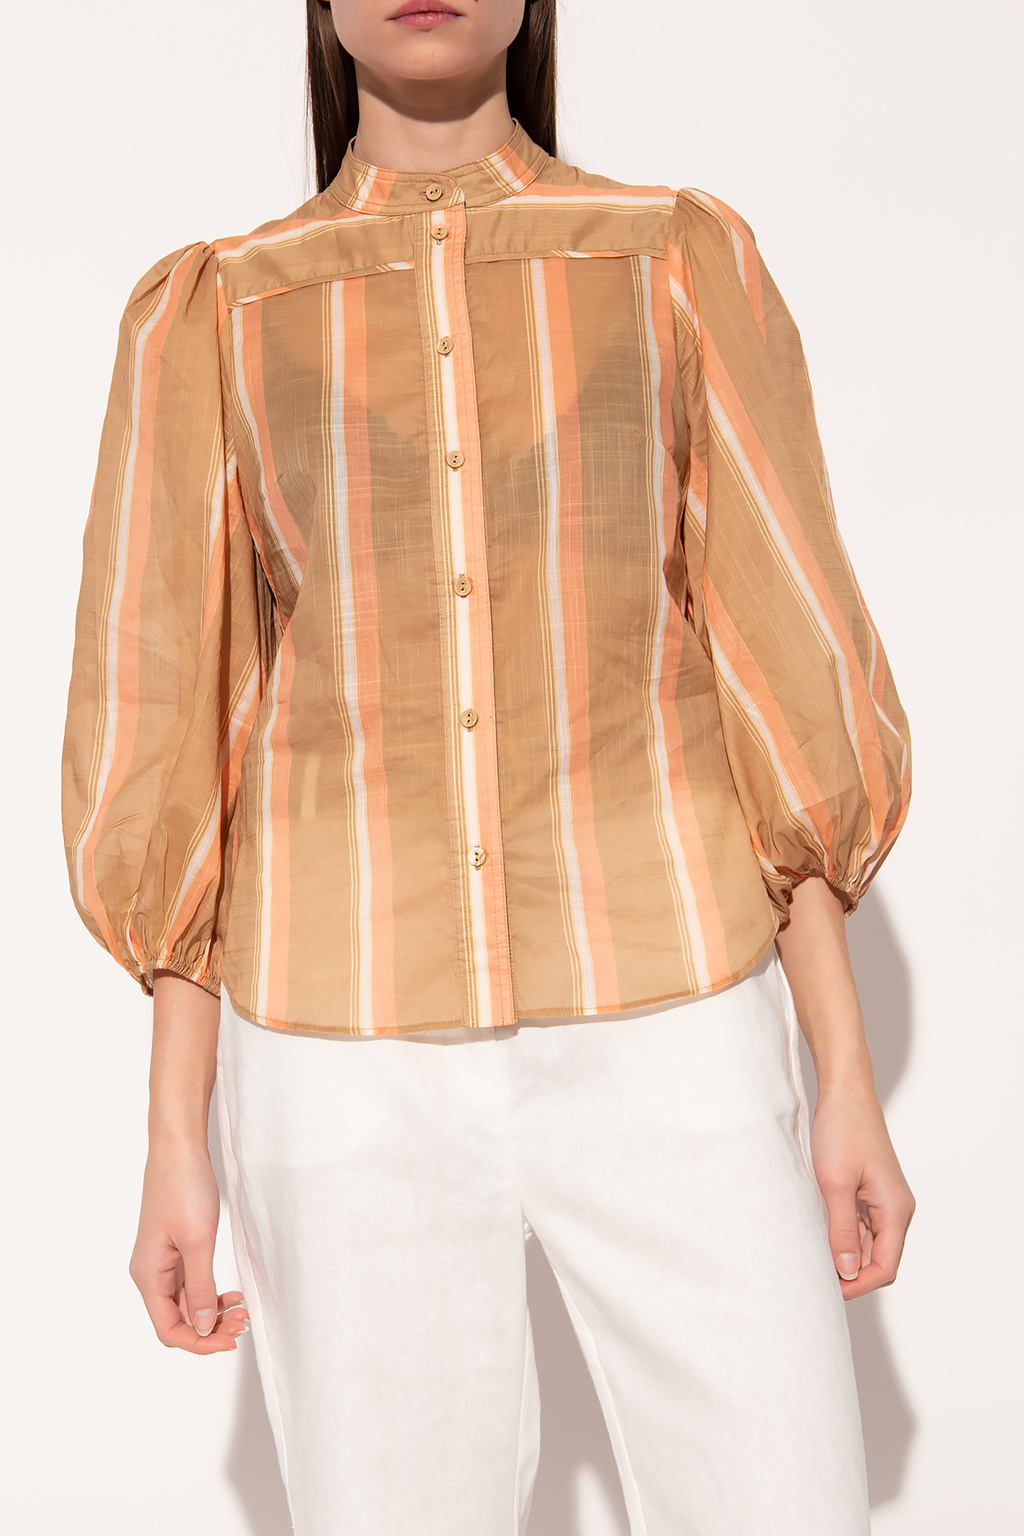 Zimmermann Top with standing collar